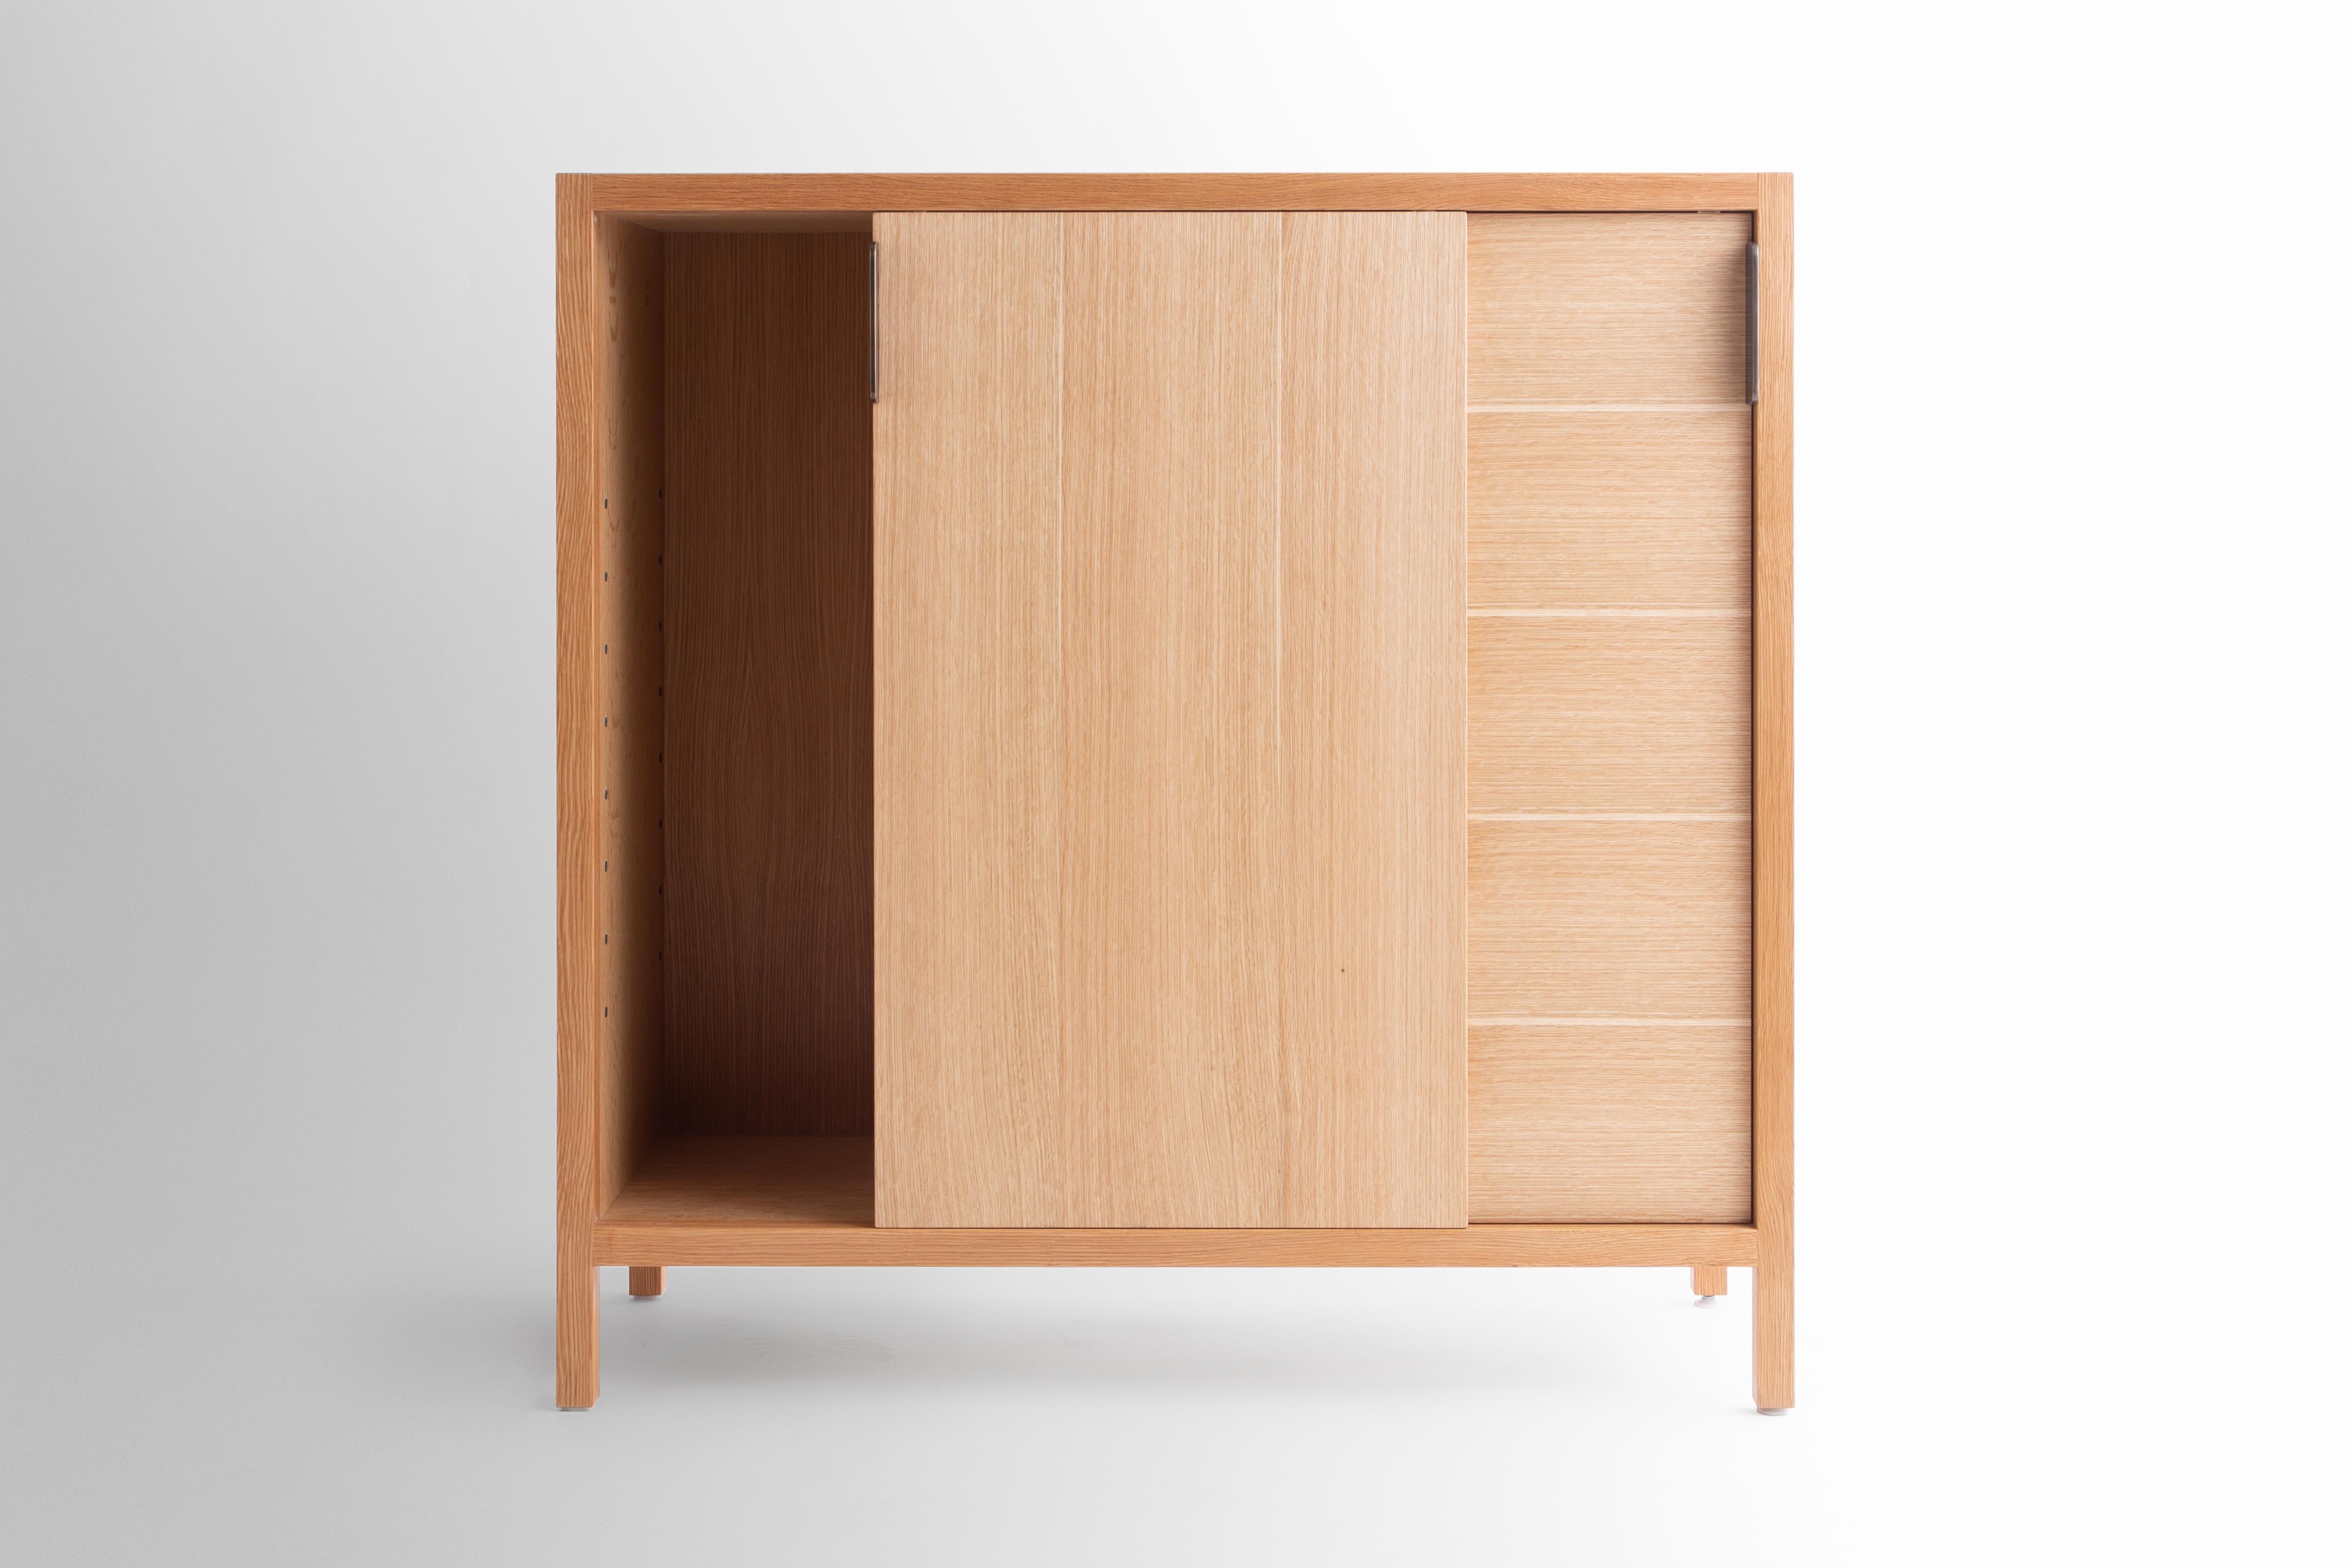 The Laska credenza is built in our Brooklyn studio using premium hardwoods and thoughtfully selected wood veneers. This piece features custom veneered panels framed flush with solid hardwood edges and legs. The sliding doors allow easy access for